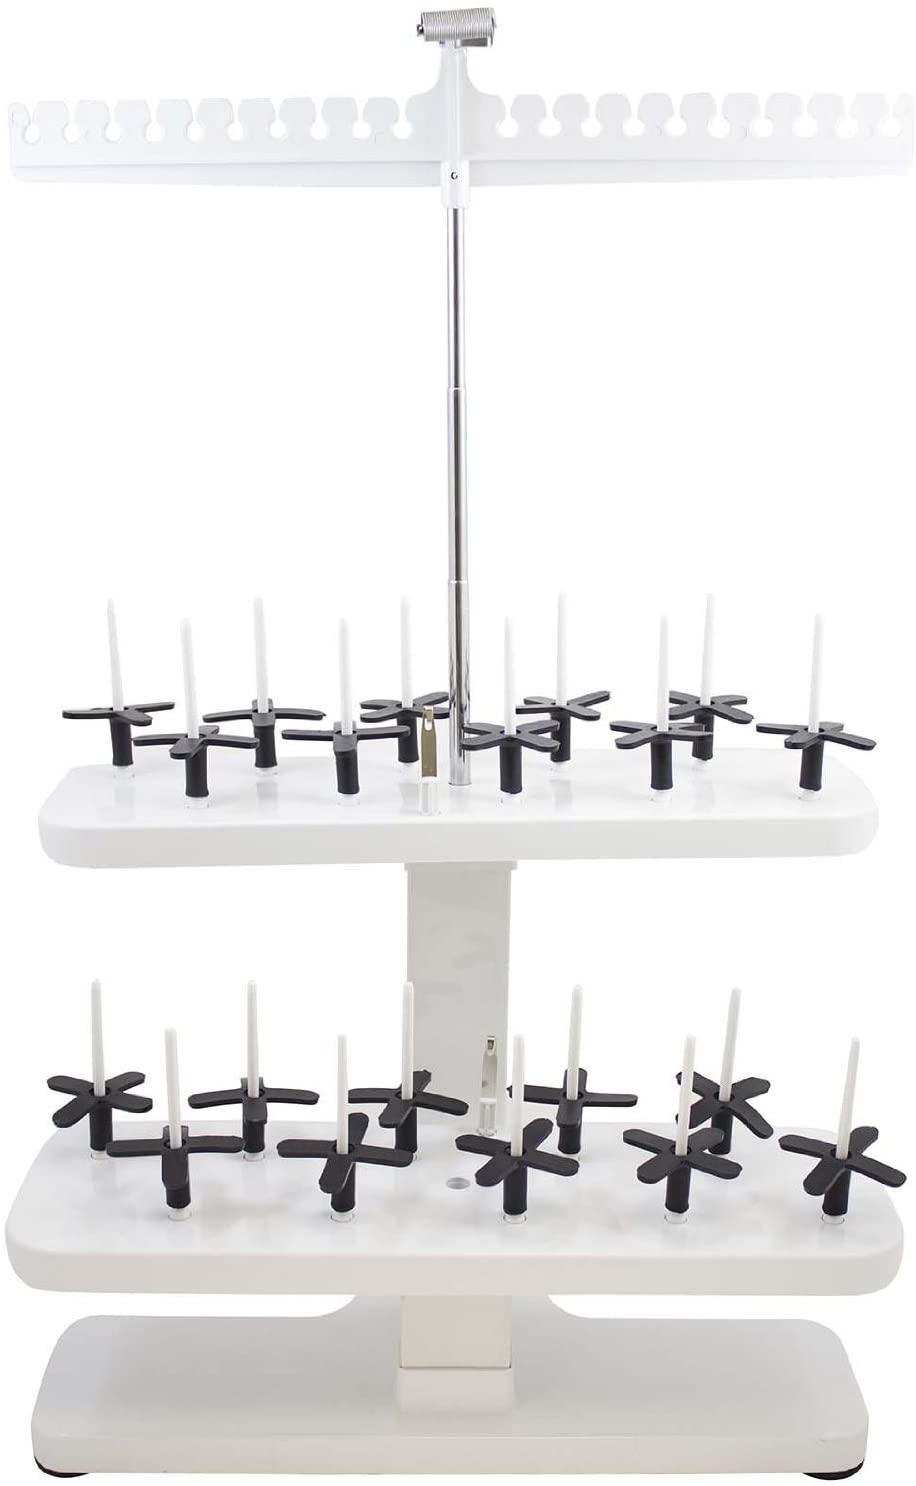 Embroidex - 20 Spool Thread Stand for All Home Embroidery Machines Brother Babylock Janome Bernina Pfaff etc.